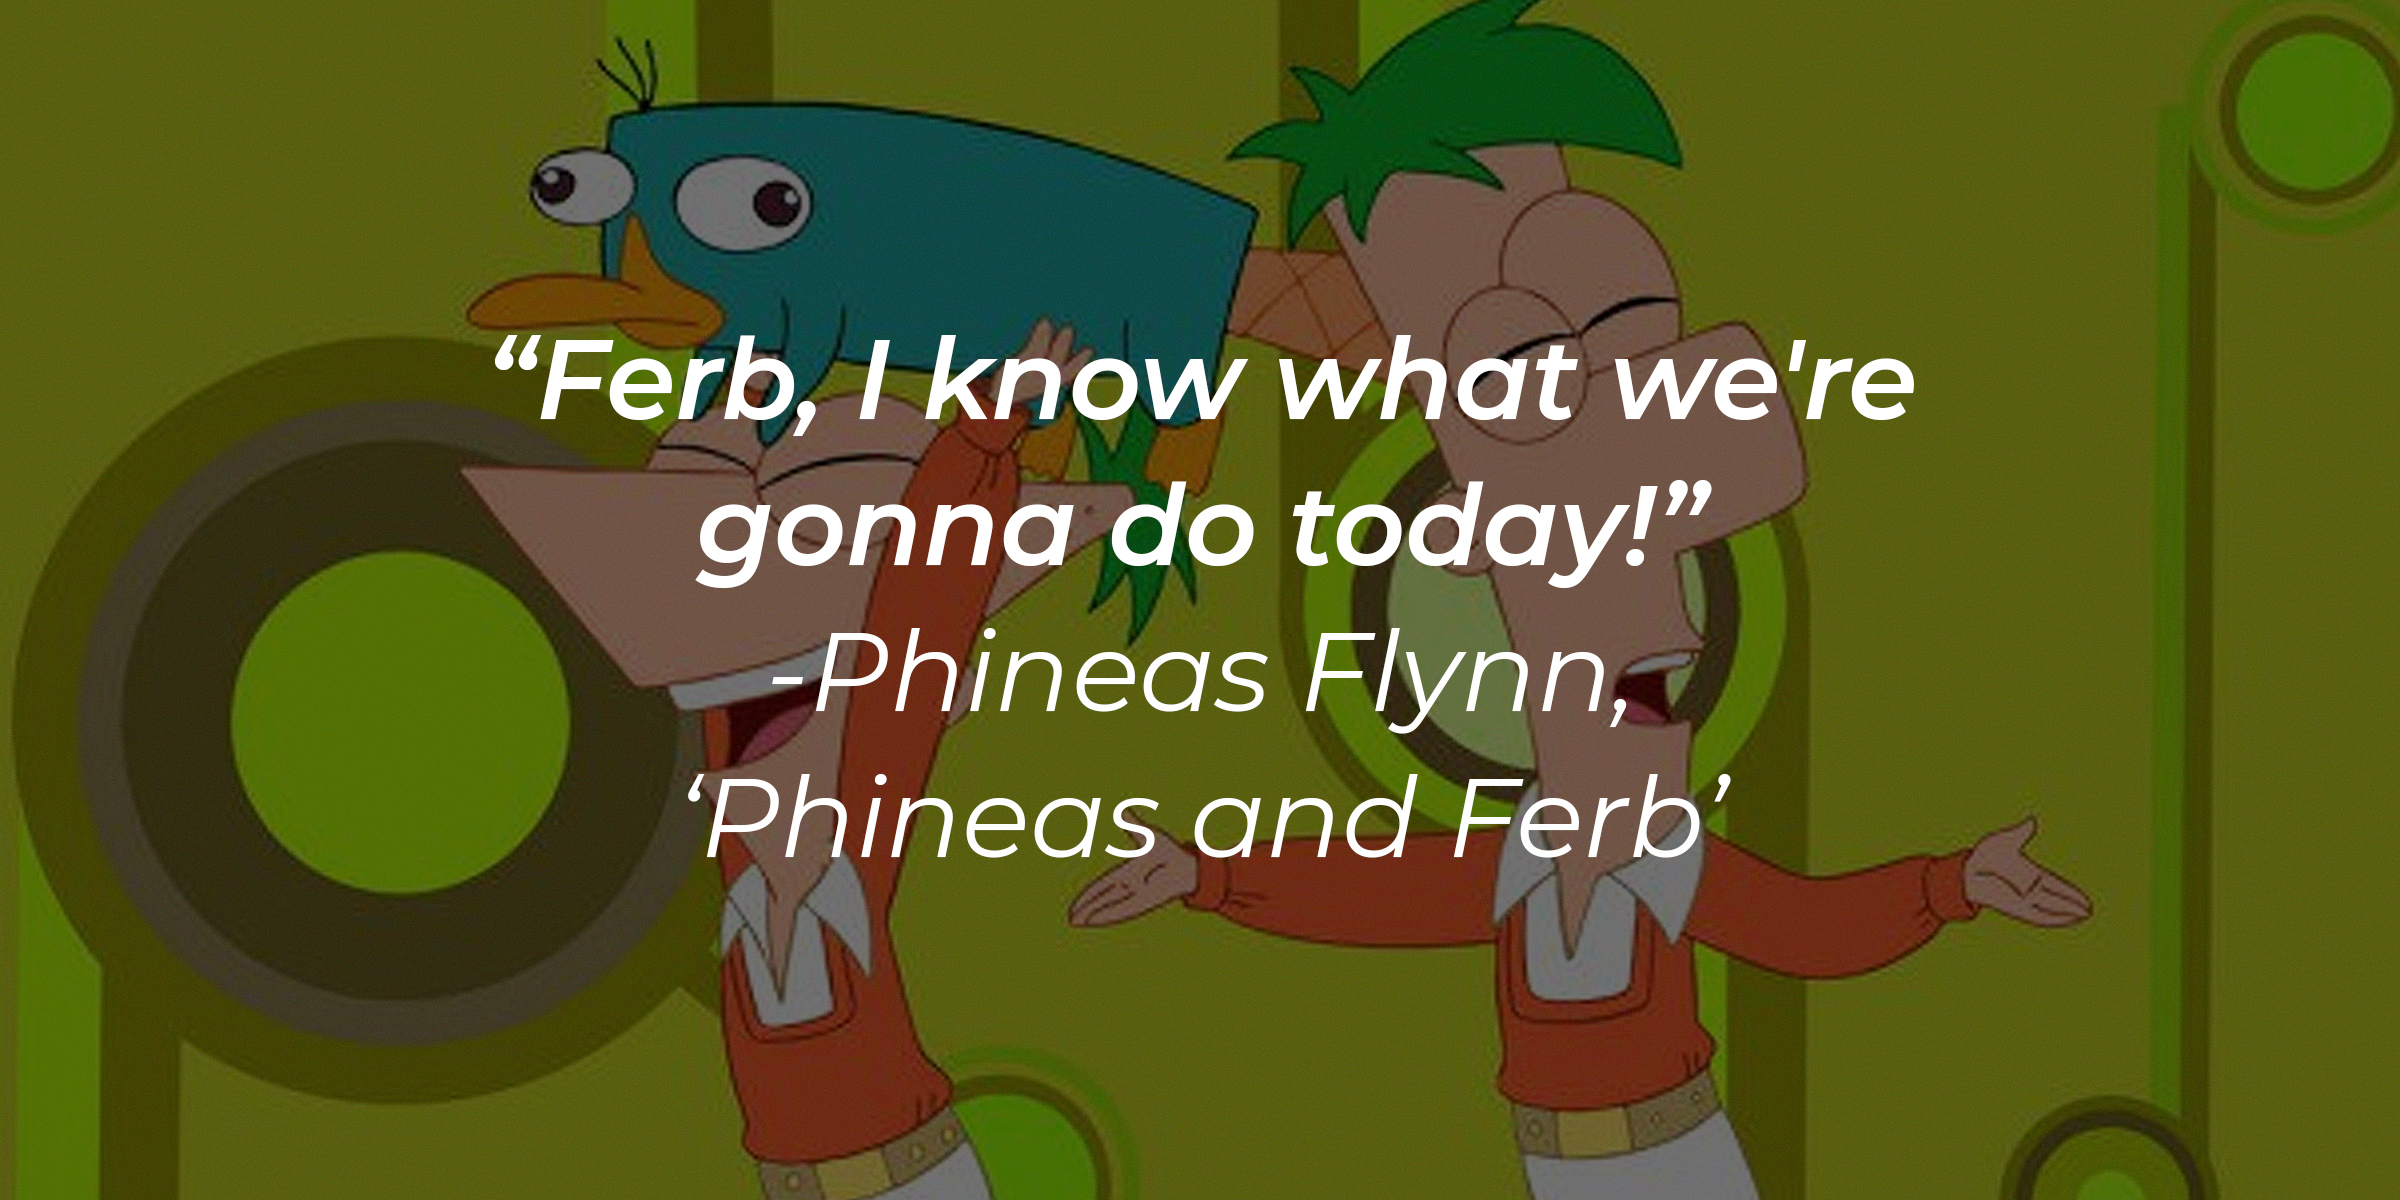 Phineas Flynn with his quote: "Ferb, I know what we're gonna do today!" | Source: facebook.com/Phineas-and-Ferb